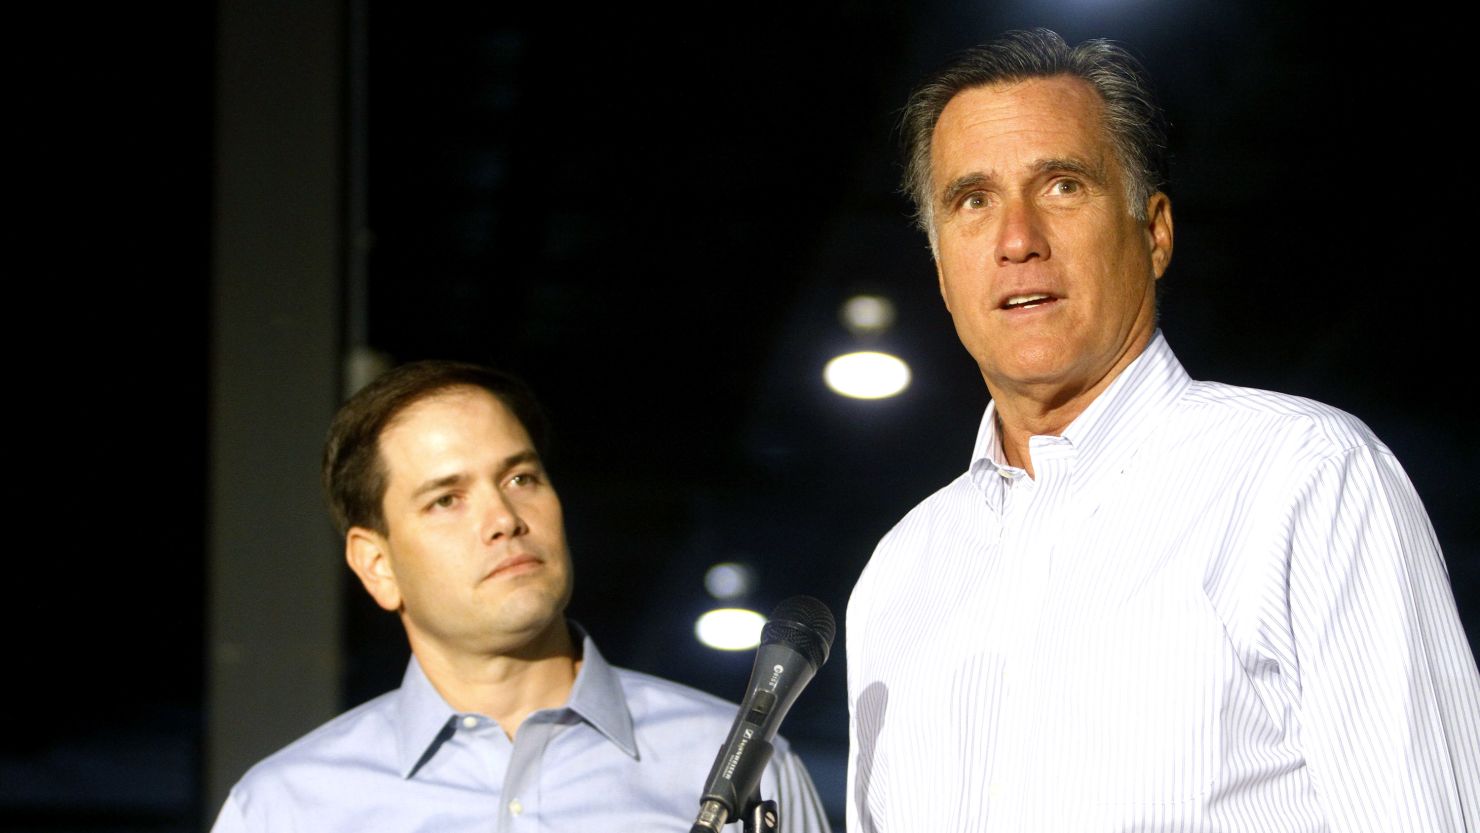 Florida Sen. Marco Rubio, left, is among those believed to be under consideration for Mitt Romney's running mate.